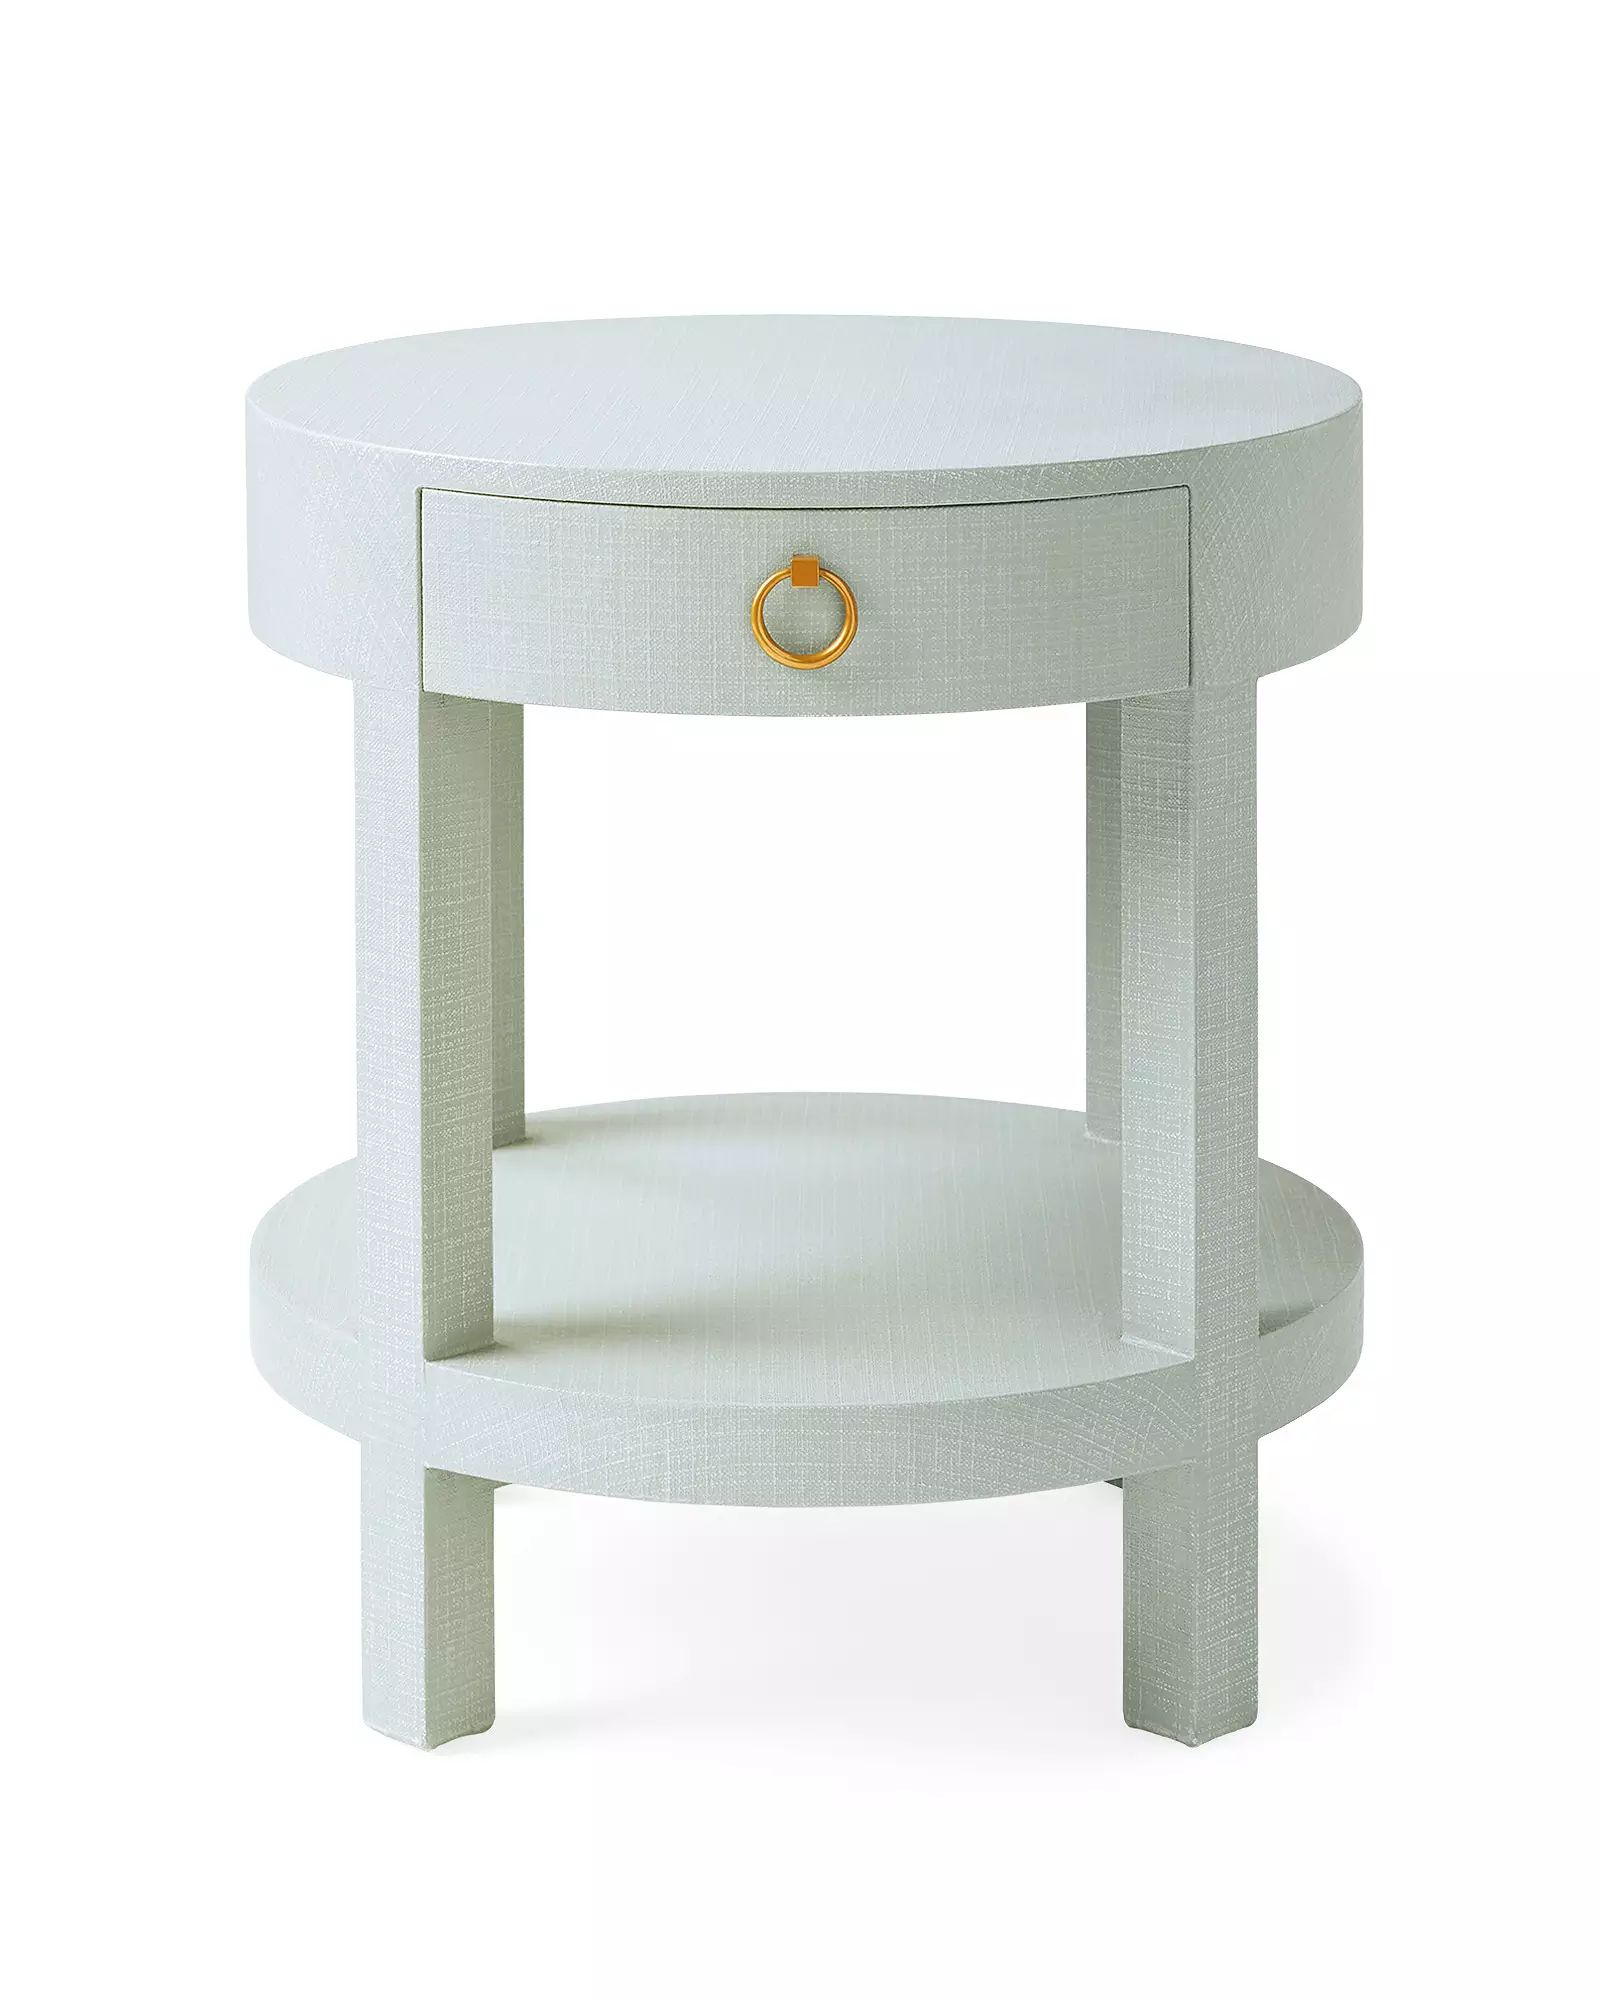 Driftway Side Table | Serena and Lily